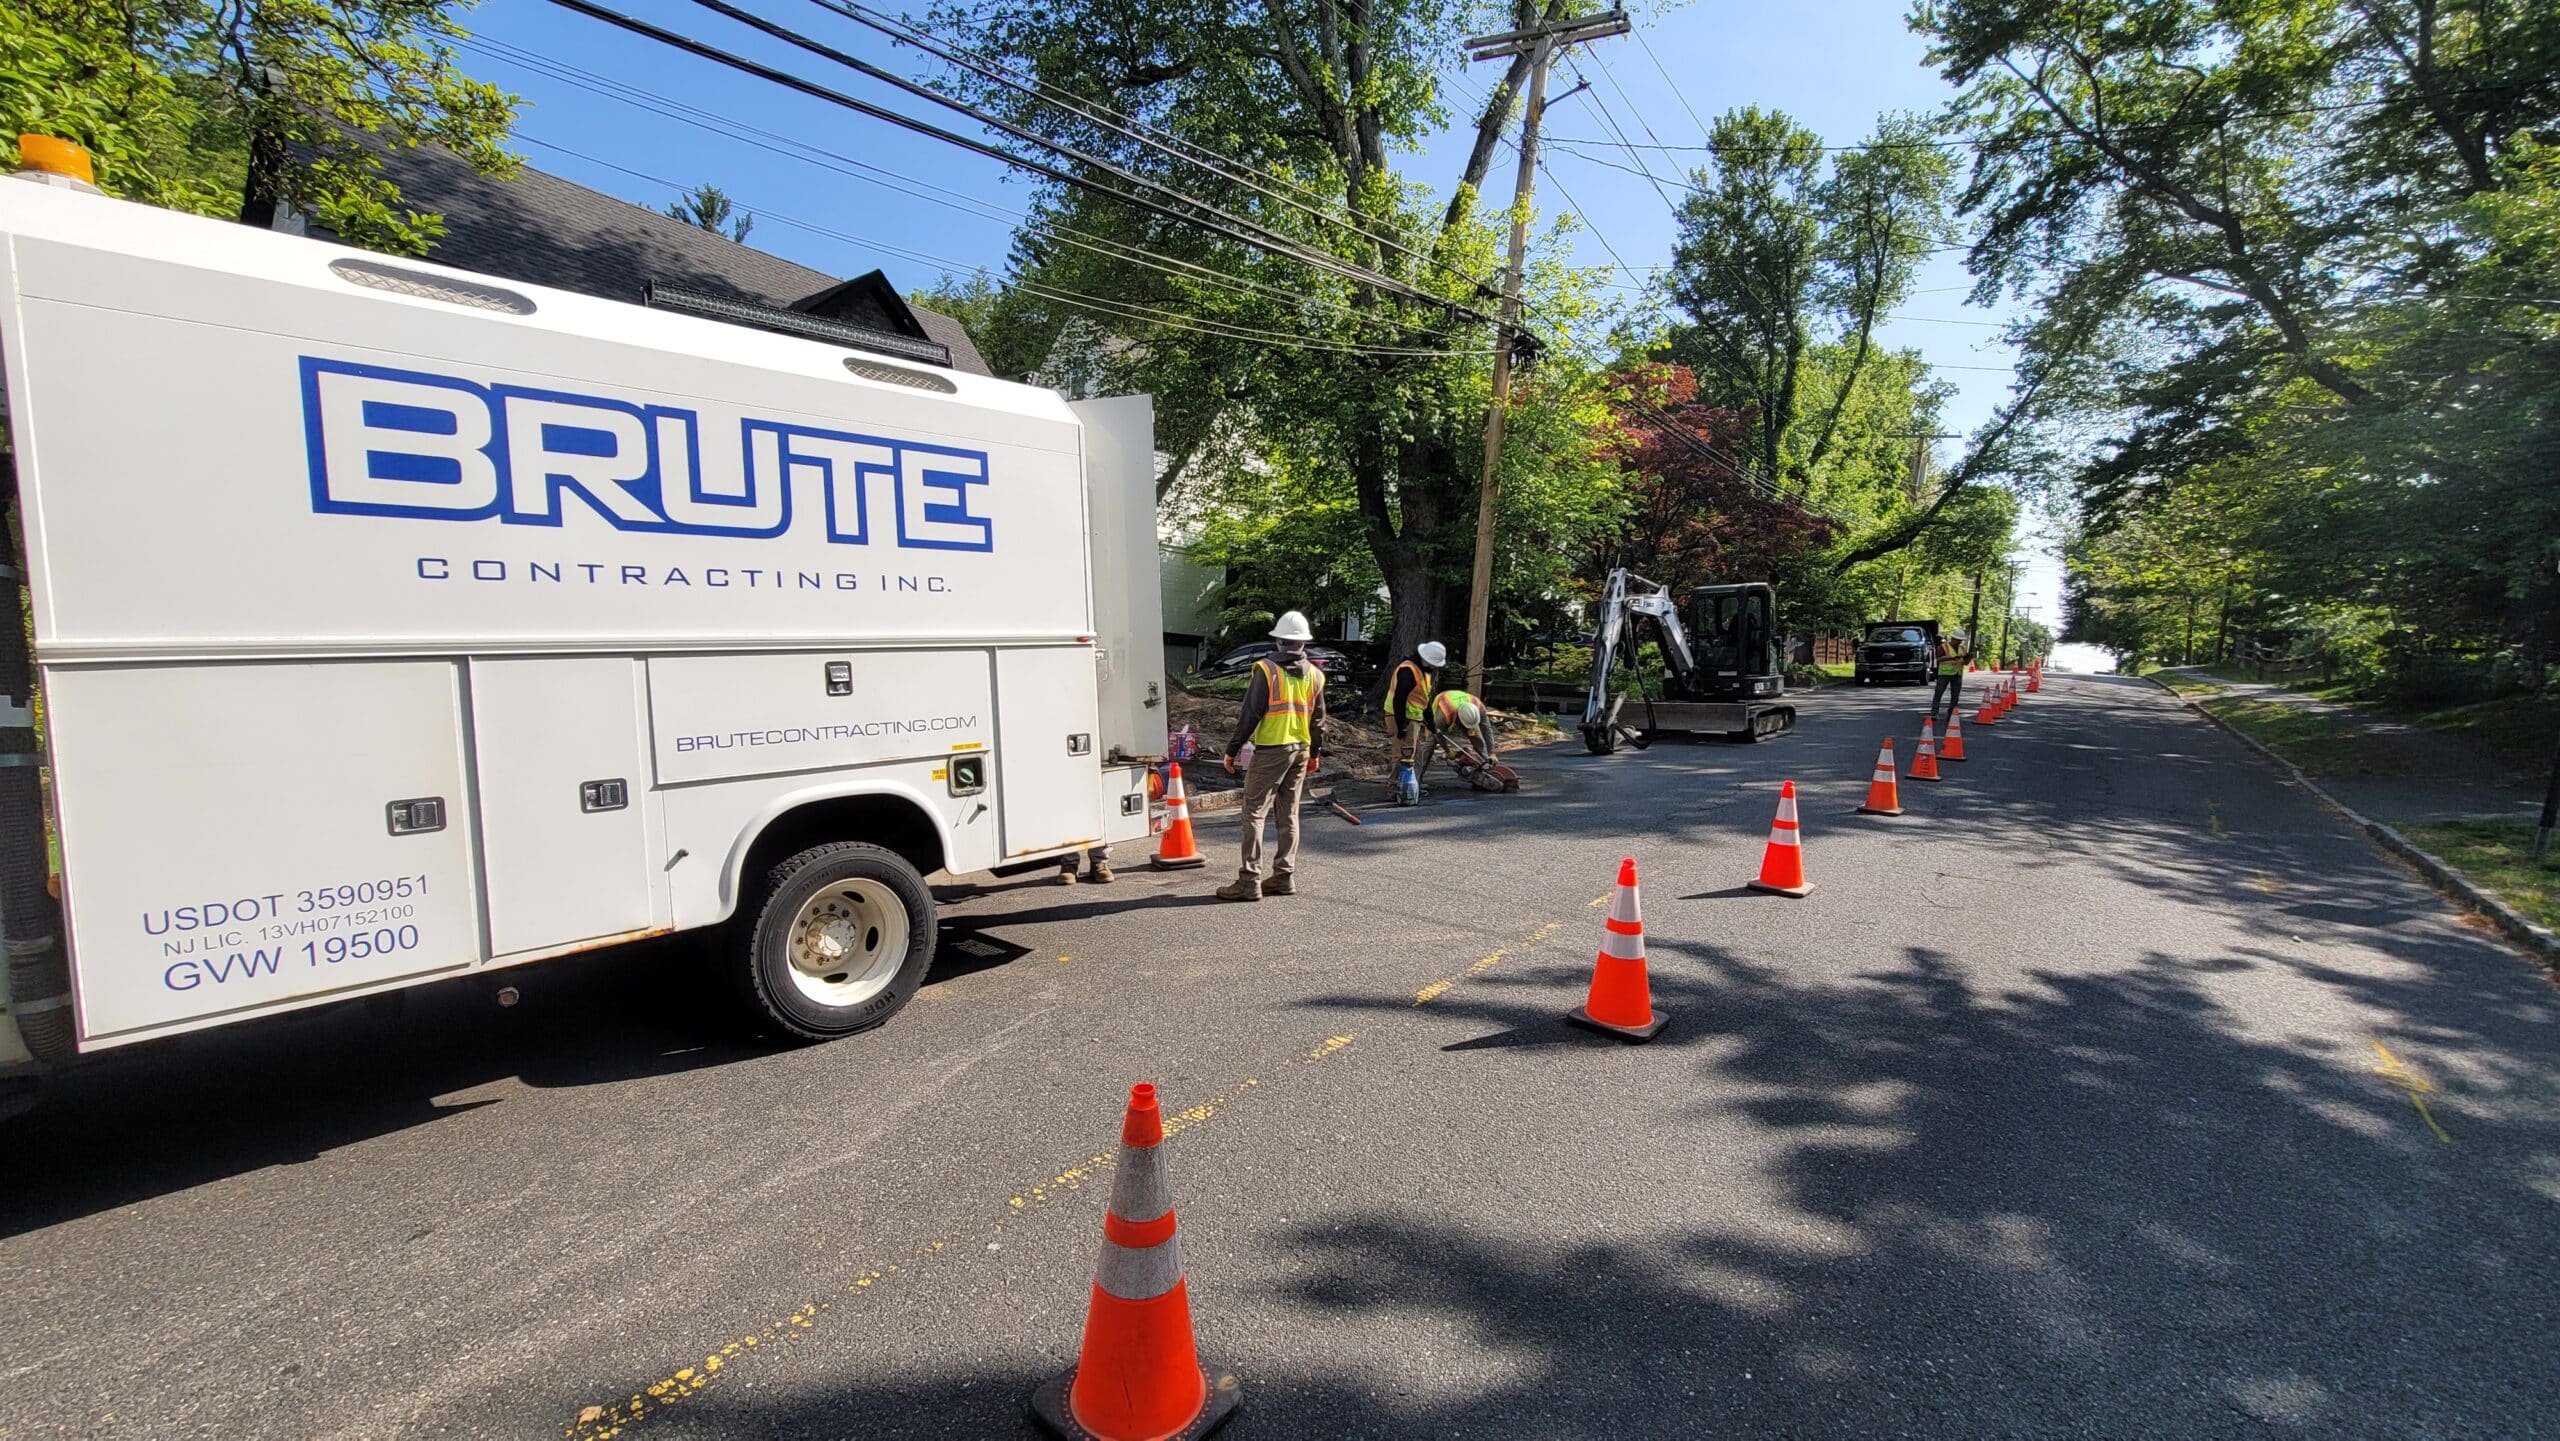 The BRUTE Contracting team completing a water line repair service in Livingston, NJ